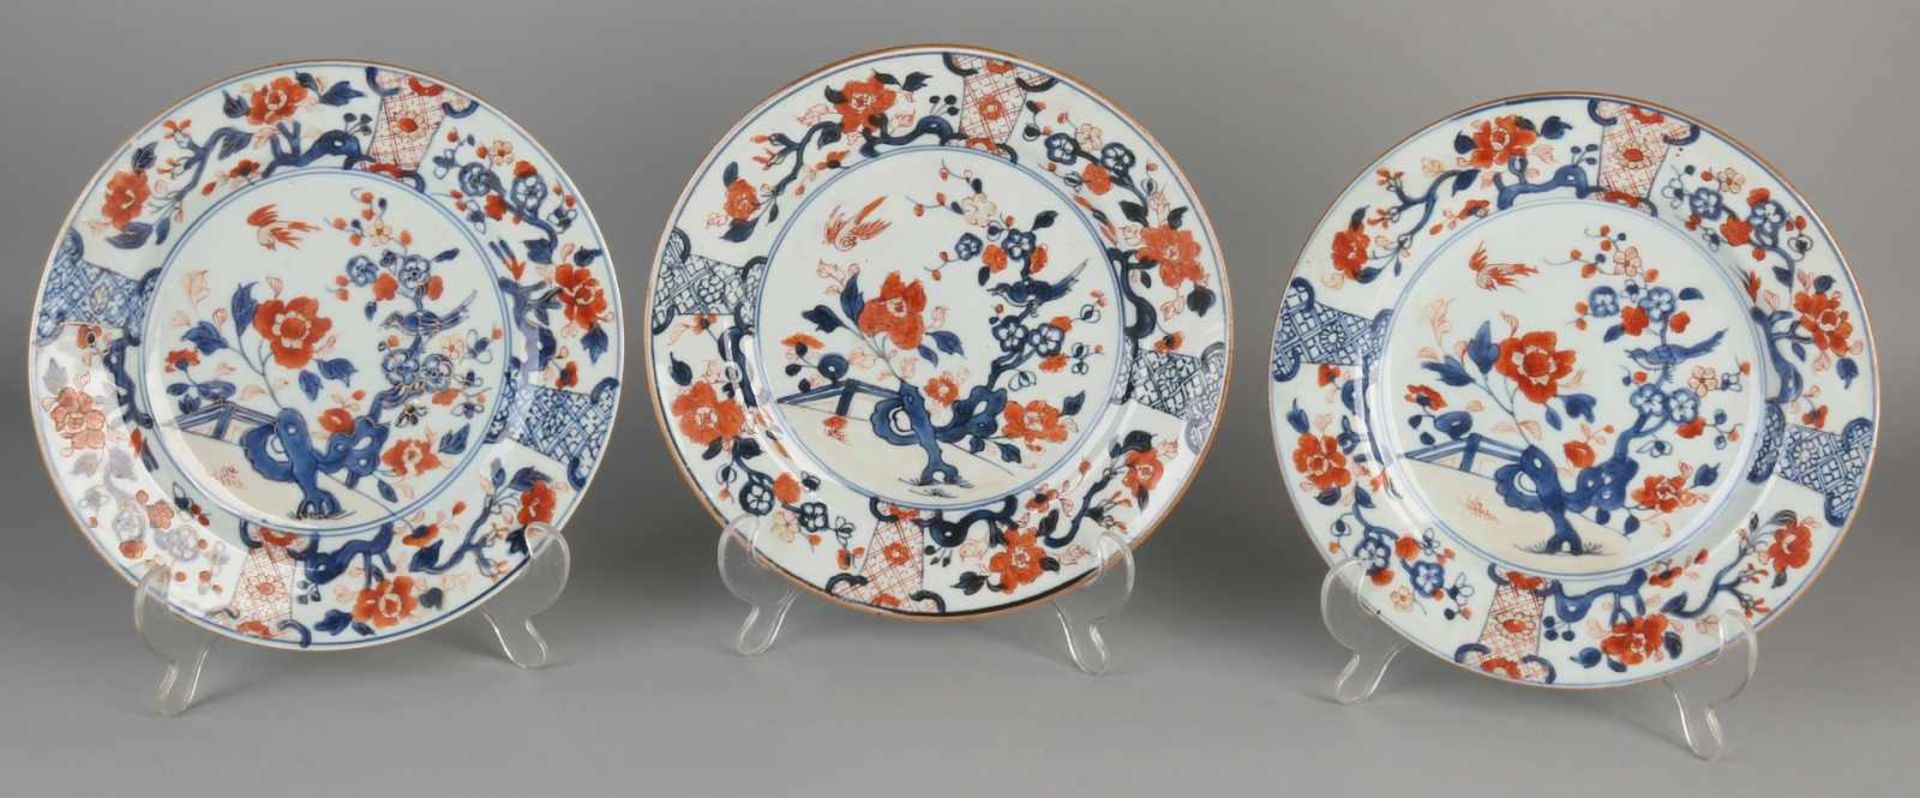 Three parts of 18th century Chinese porcelain. Family Rose signs with garden decor. Size: ø 23 cm.